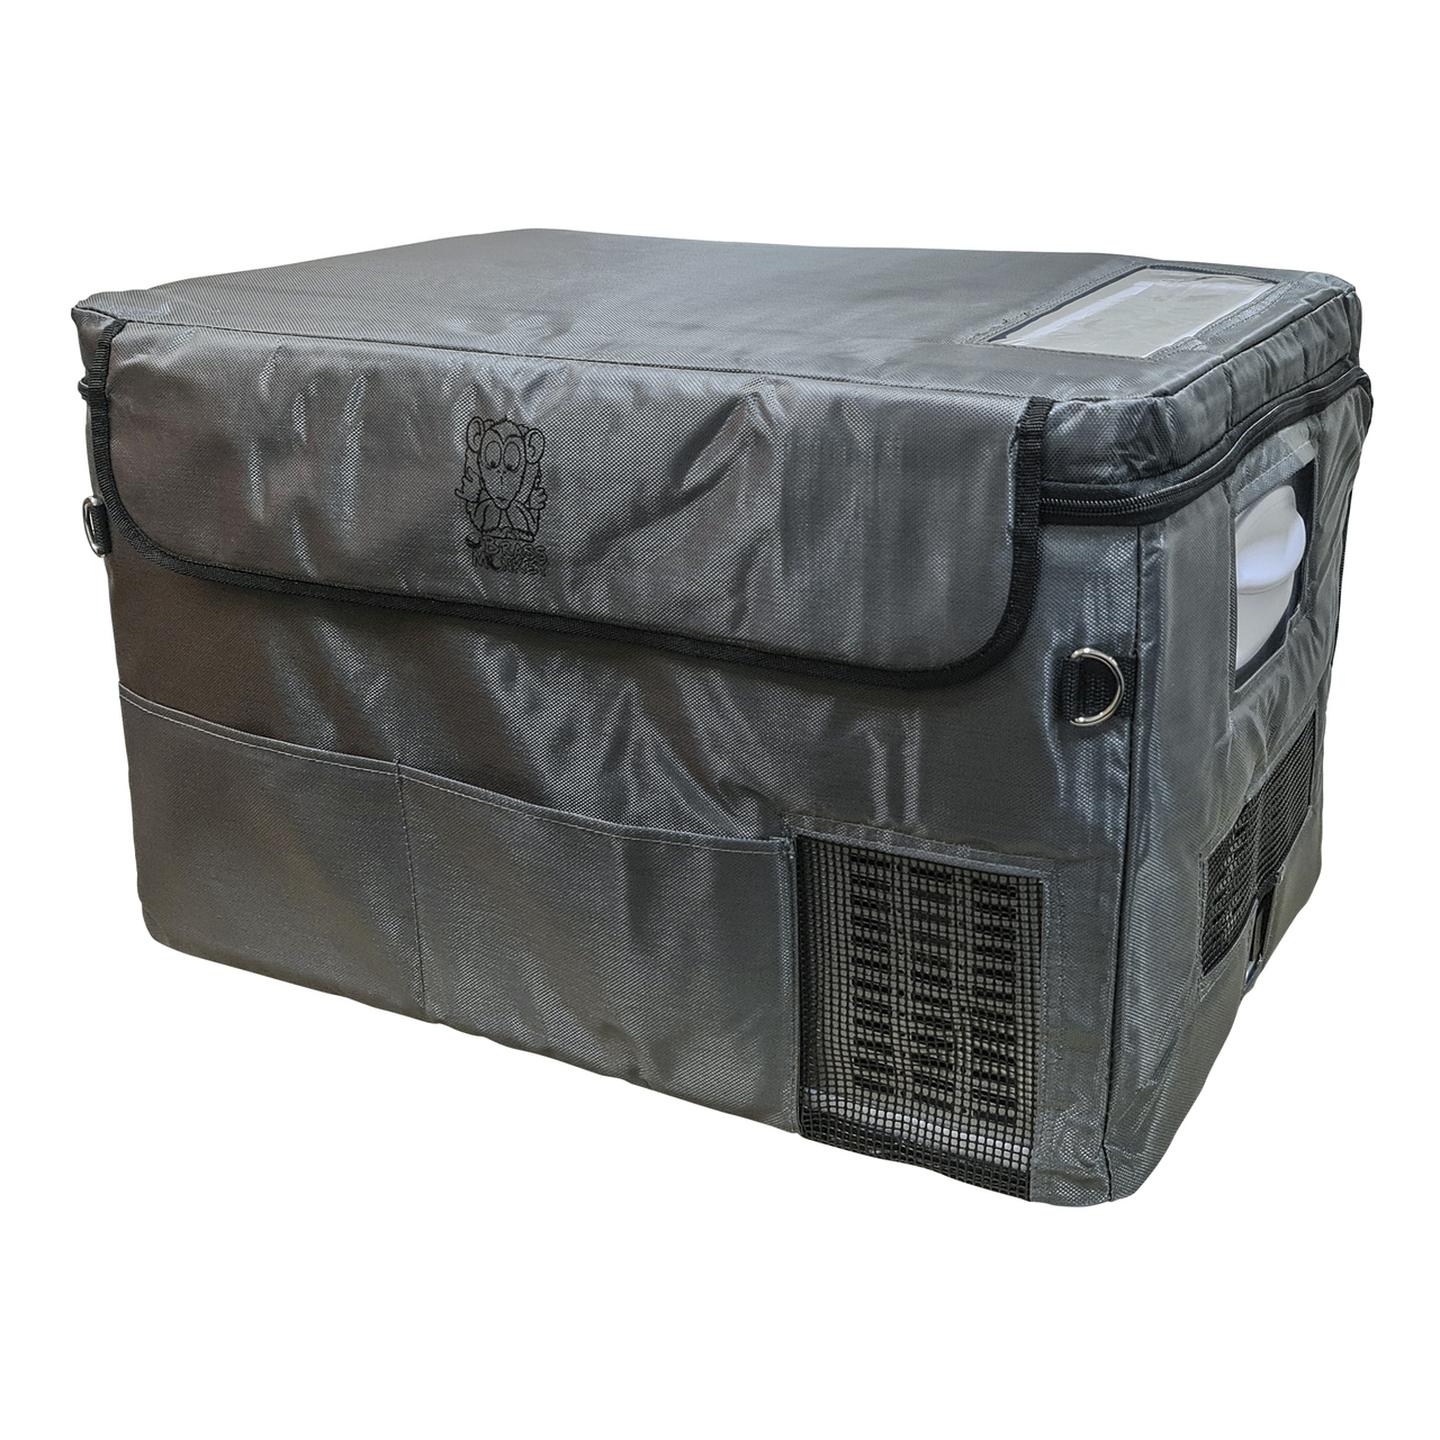 Grey Insulated Cover for 25L Brass Monkey Portable Fridge/Freezer